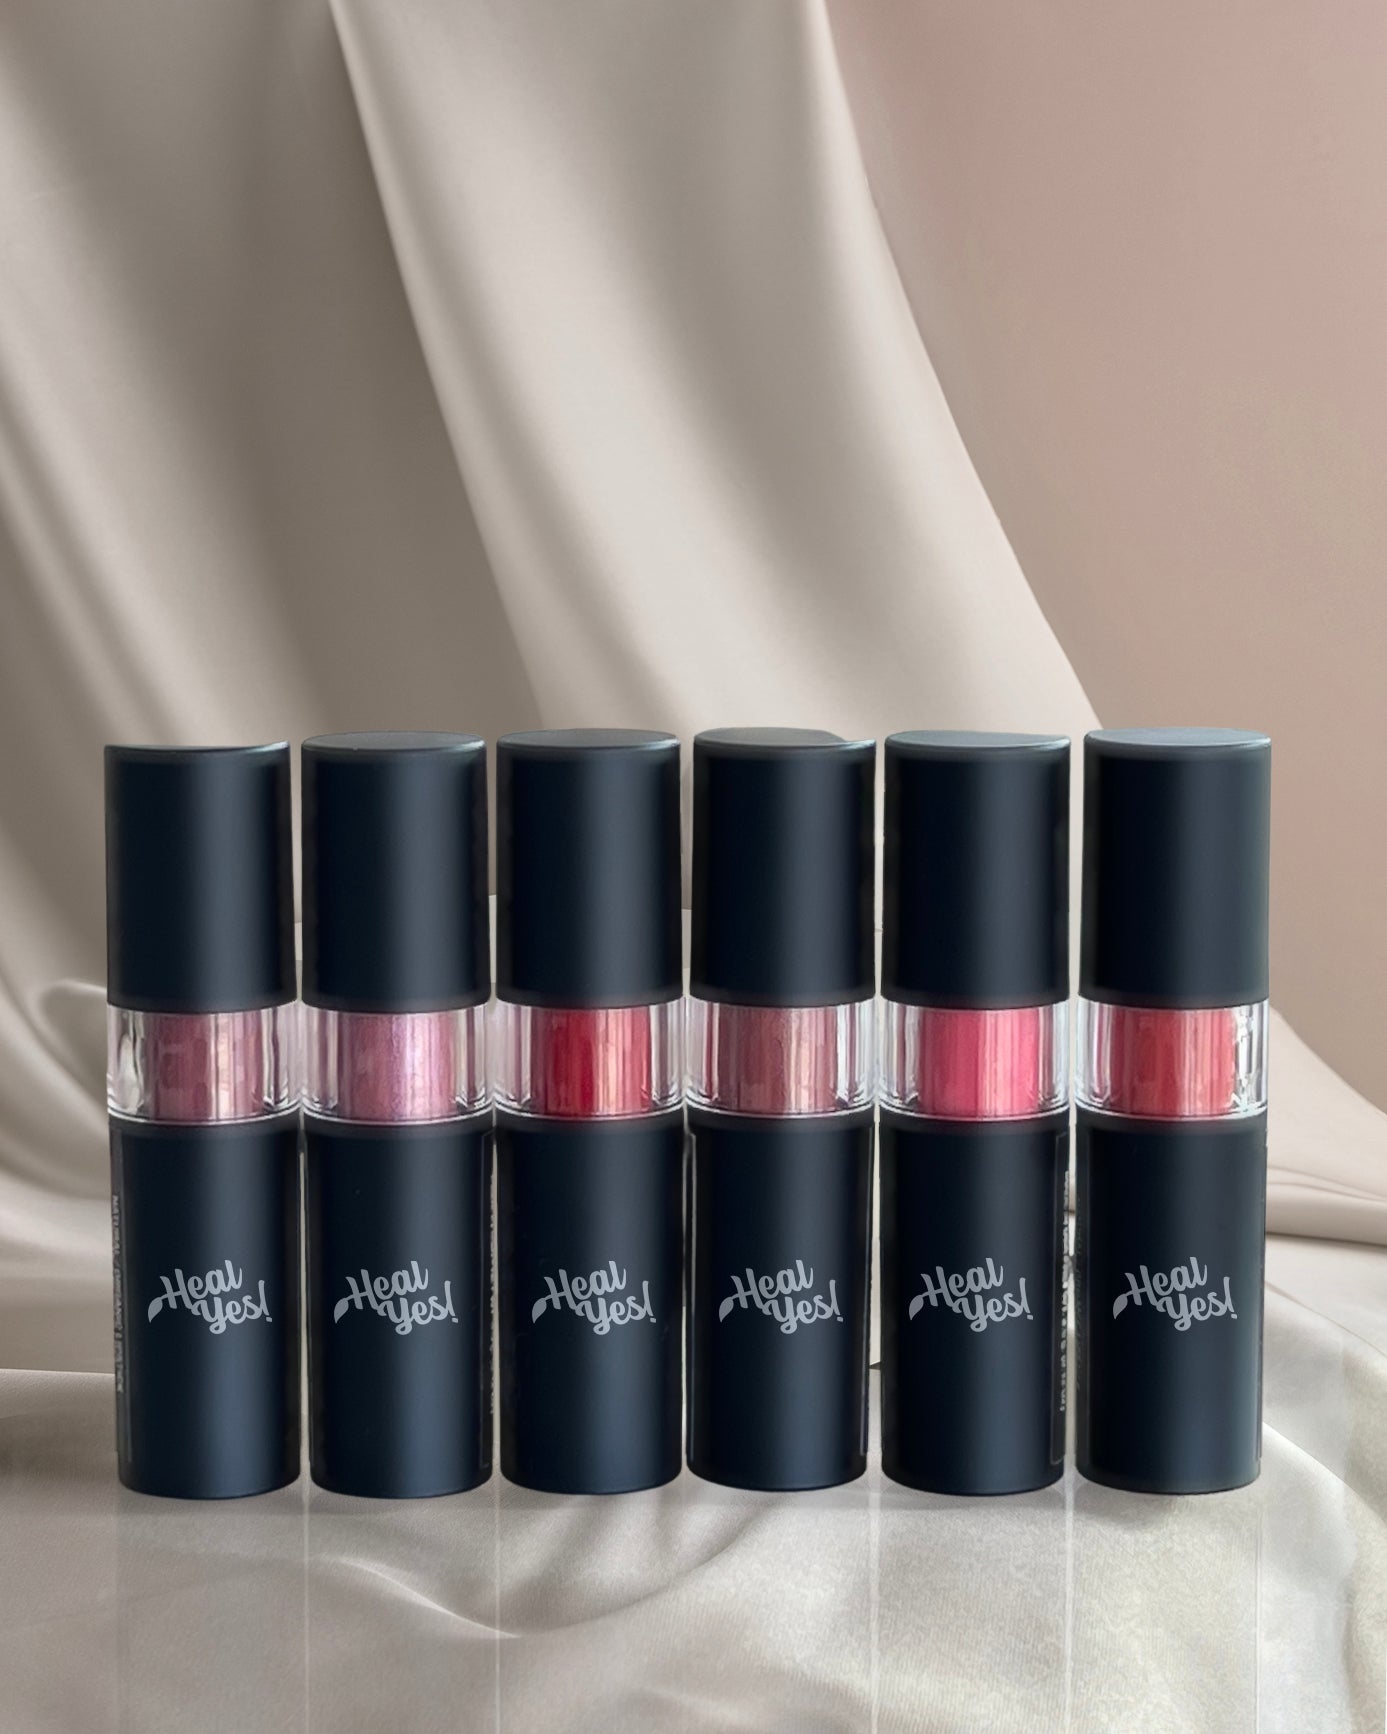 & Luxe - – Lipstick More! Yes! Heal Nutrient-Rich Vegan, Talc-Free